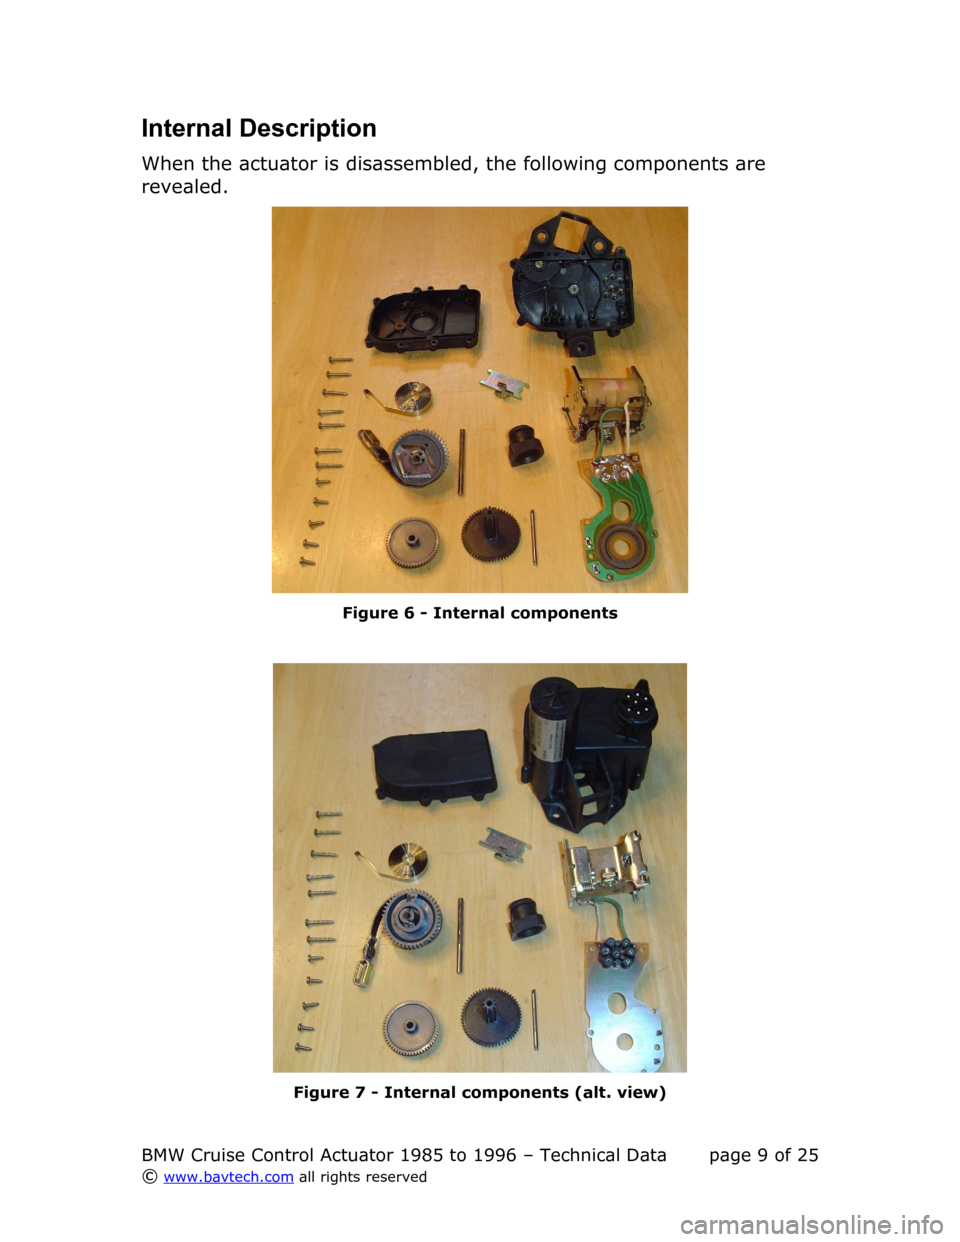 BMW 3 SERIES 1996 E36 Cruise Control Acutator Internal Description
When the actuator is disassembled, the following components are  
revealed.
Figure  6  - Internal components
Figure  7  - Internal components (alt. view)
BMW Cruise Control Actuat